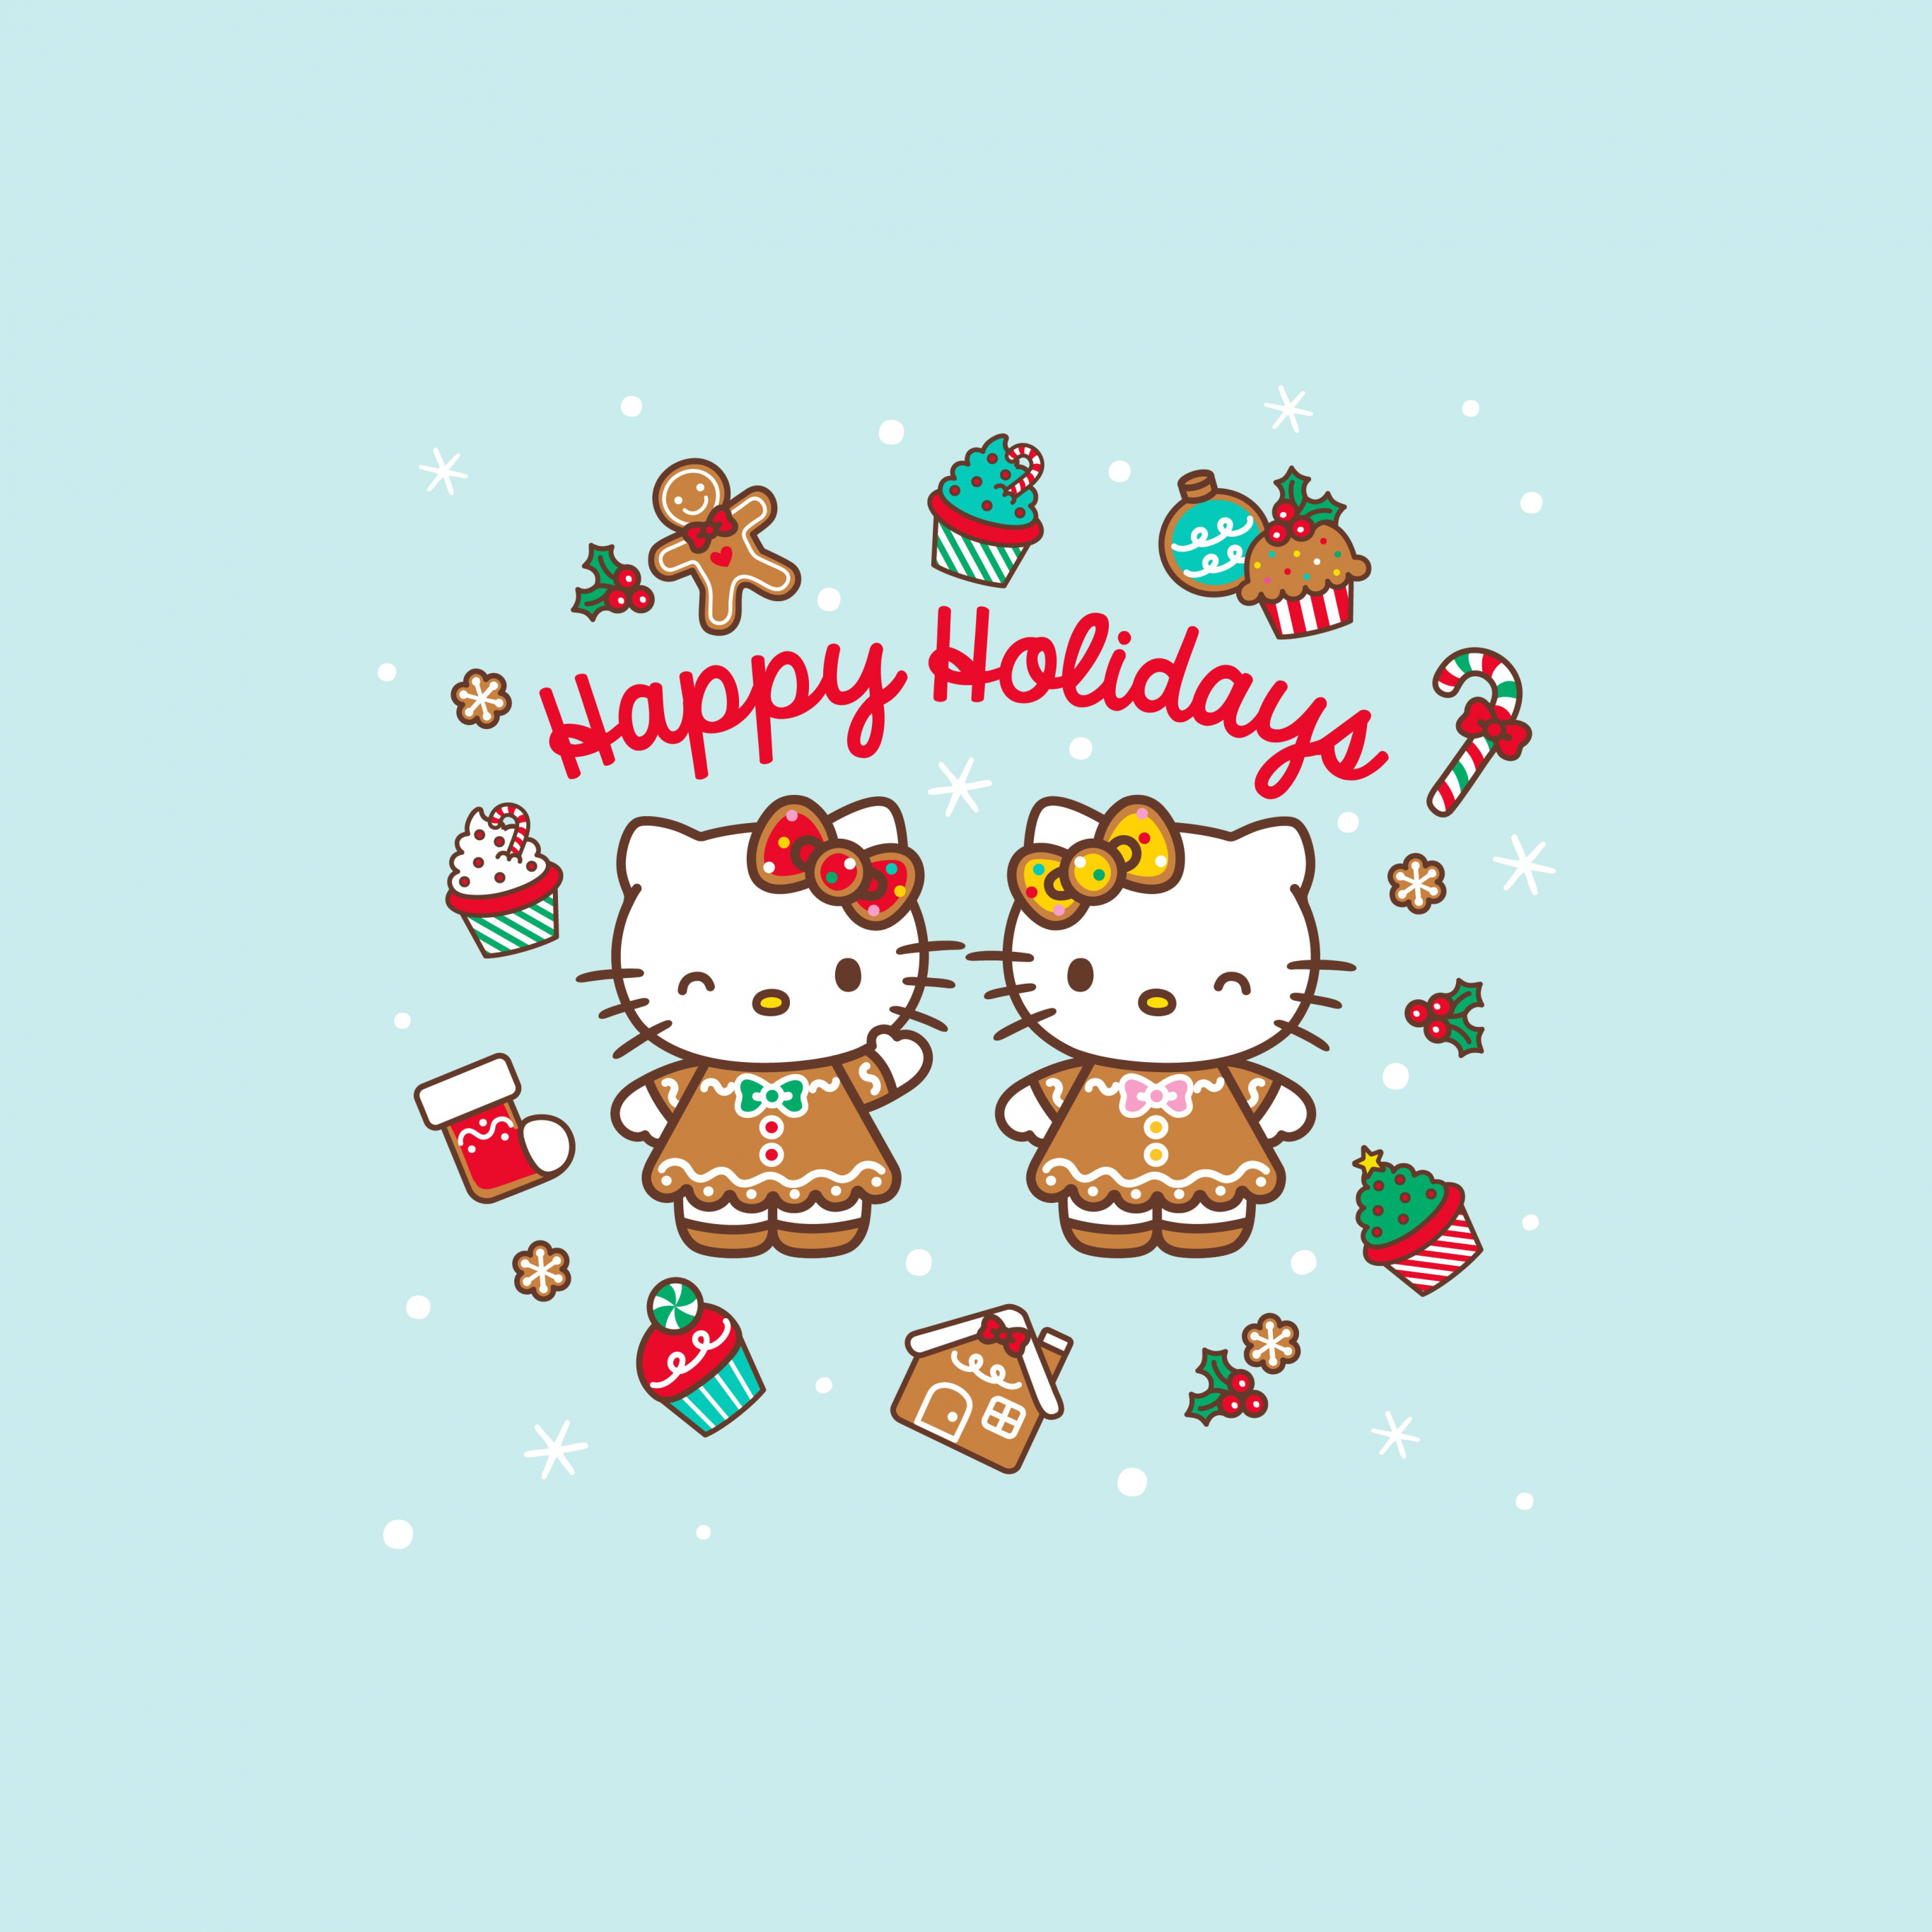 Holidays wallpapers and backgrounds